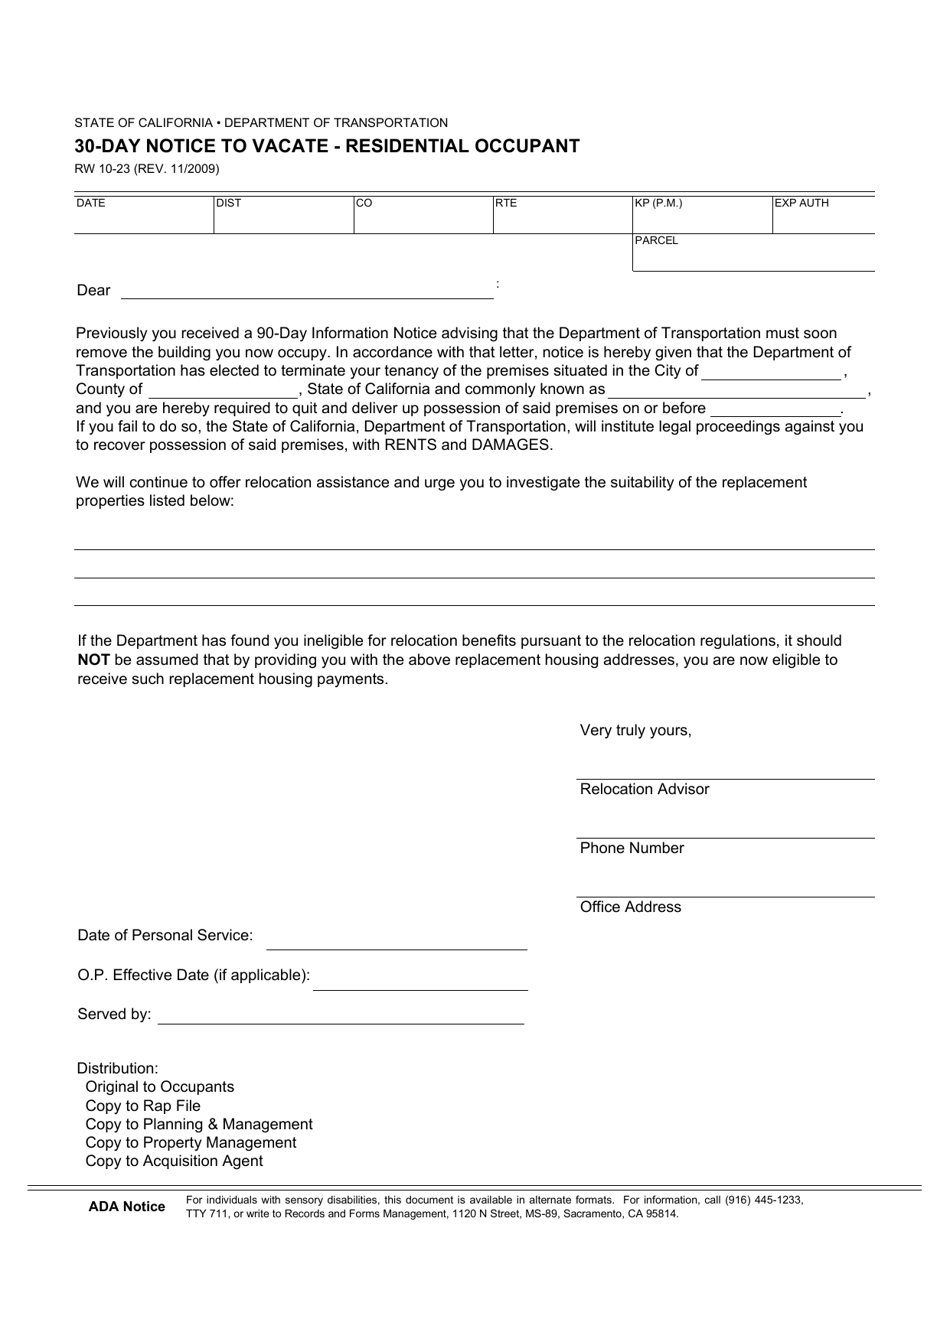 Form RW10-23 30-day Notice to Vacate - Residential Occupant - California, Page 1